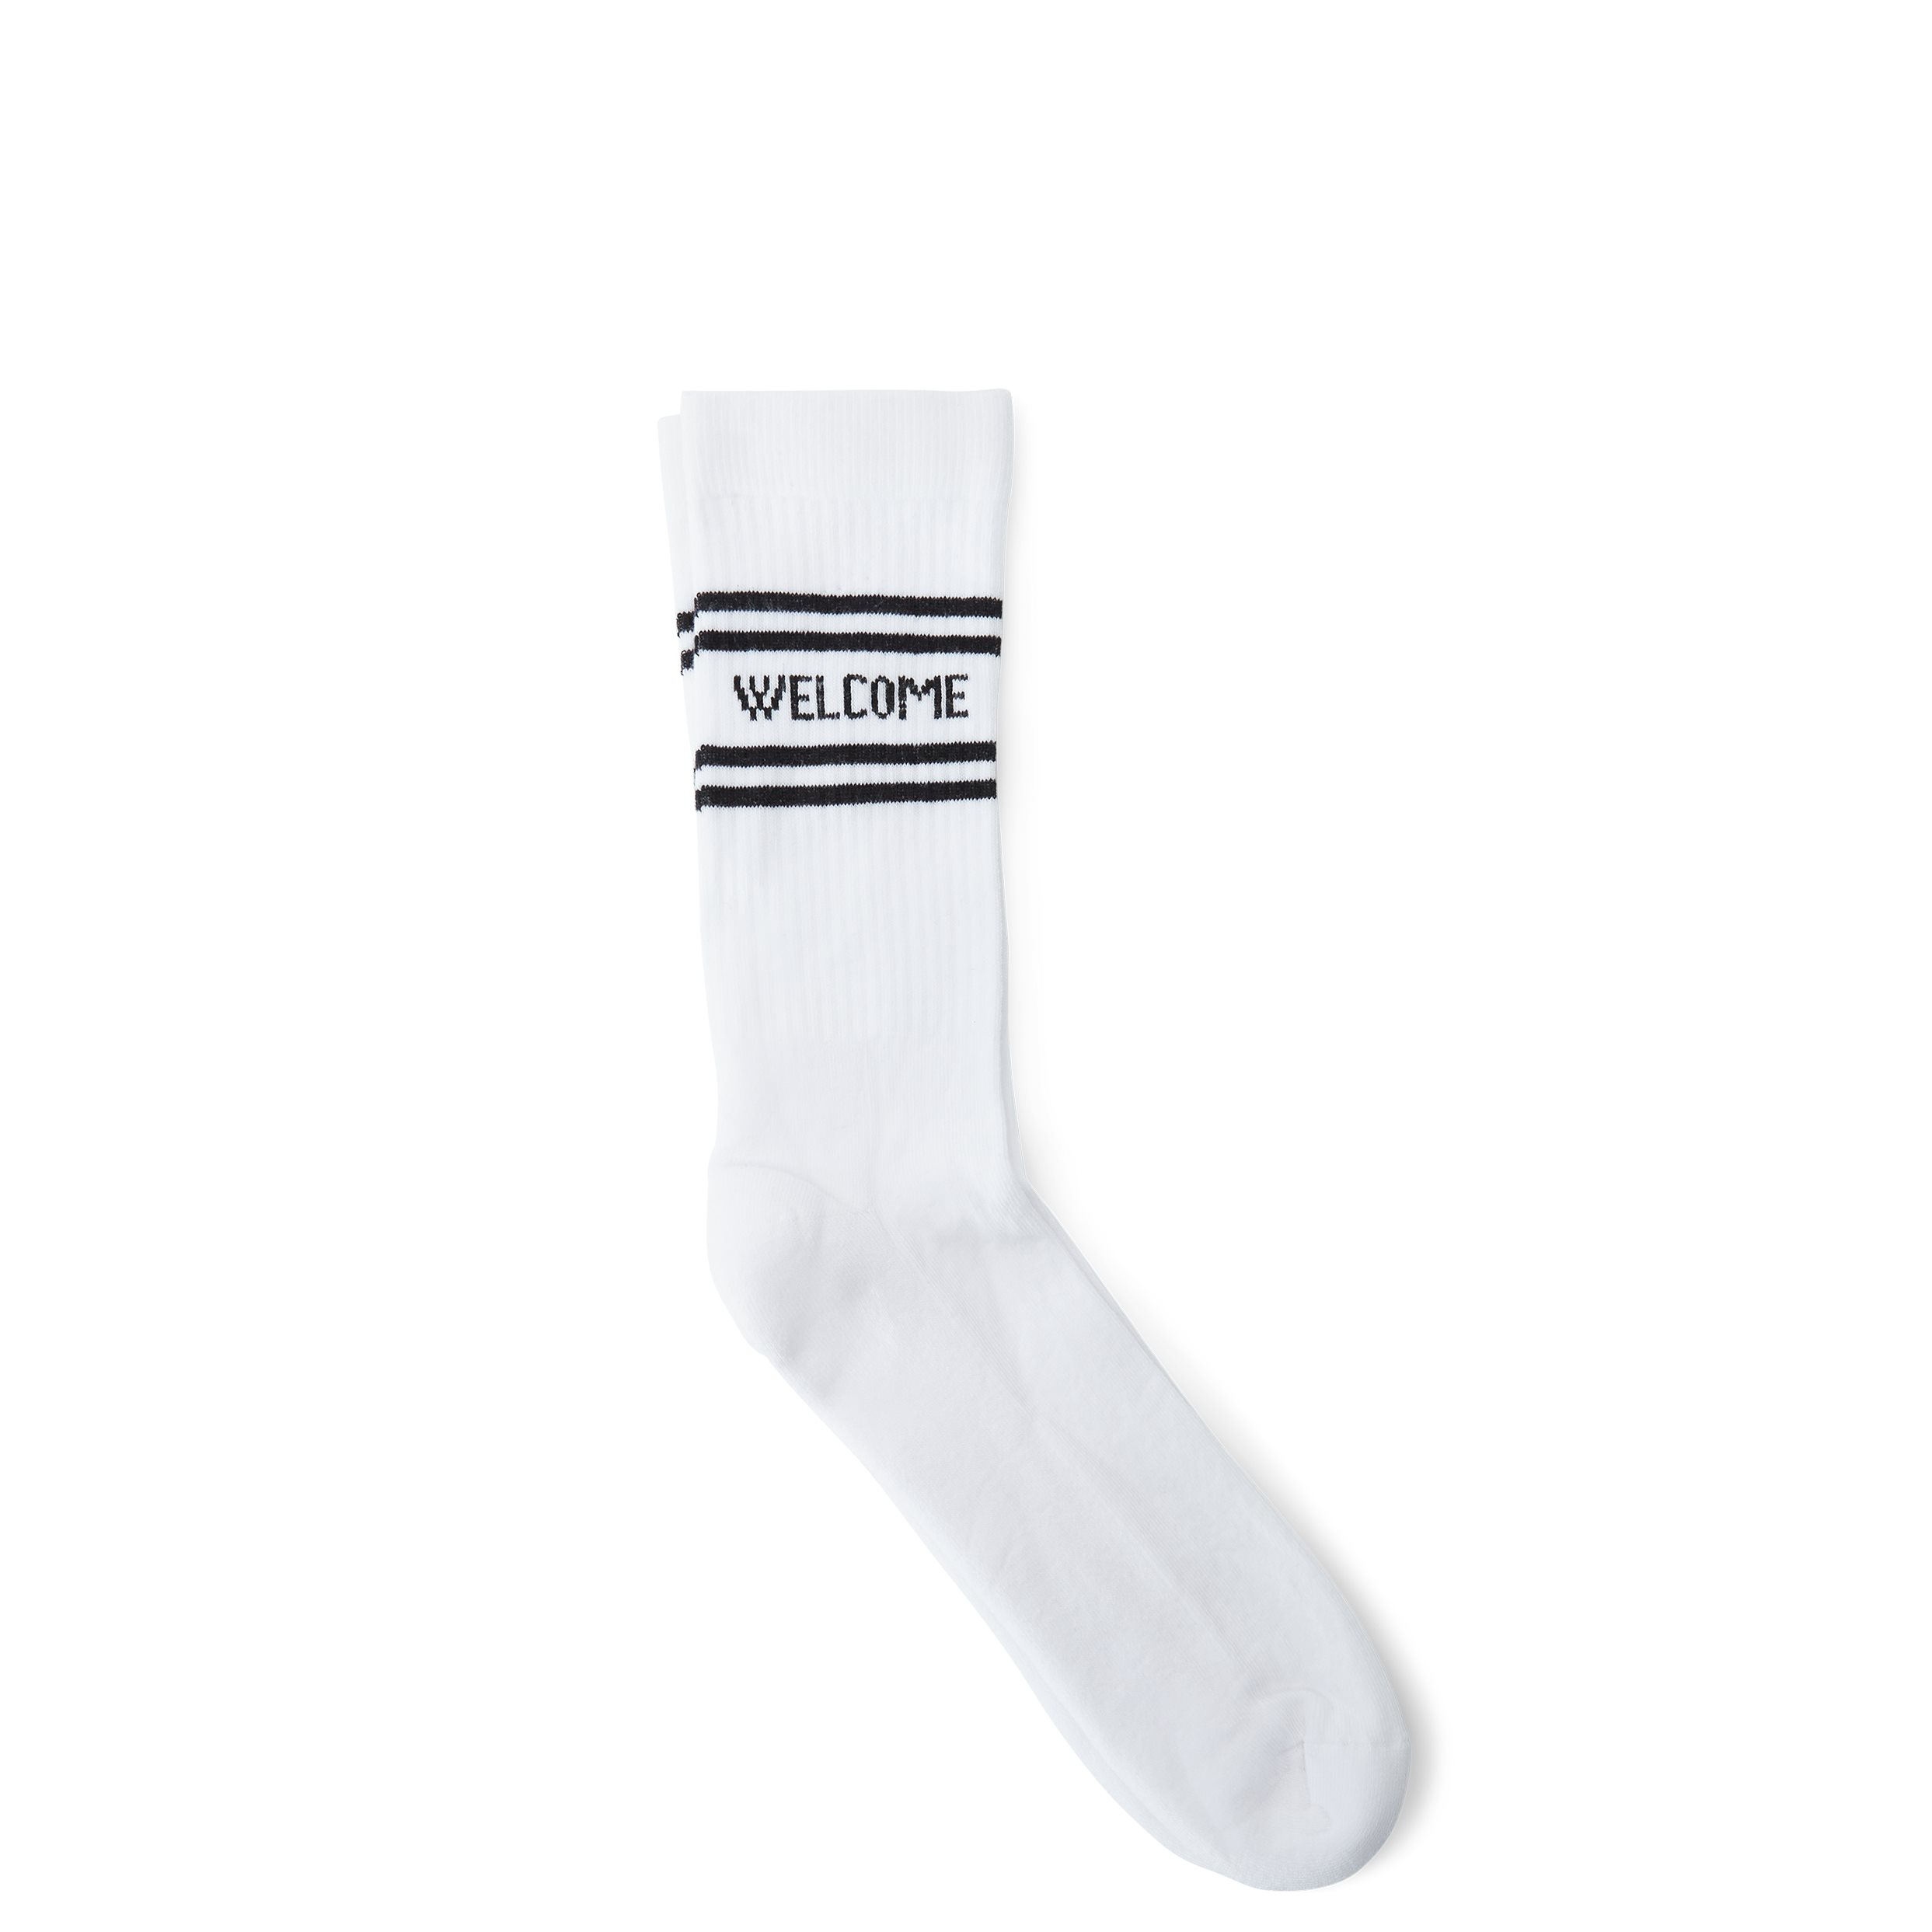 qUINT Socks WELCOME 115-12527 White